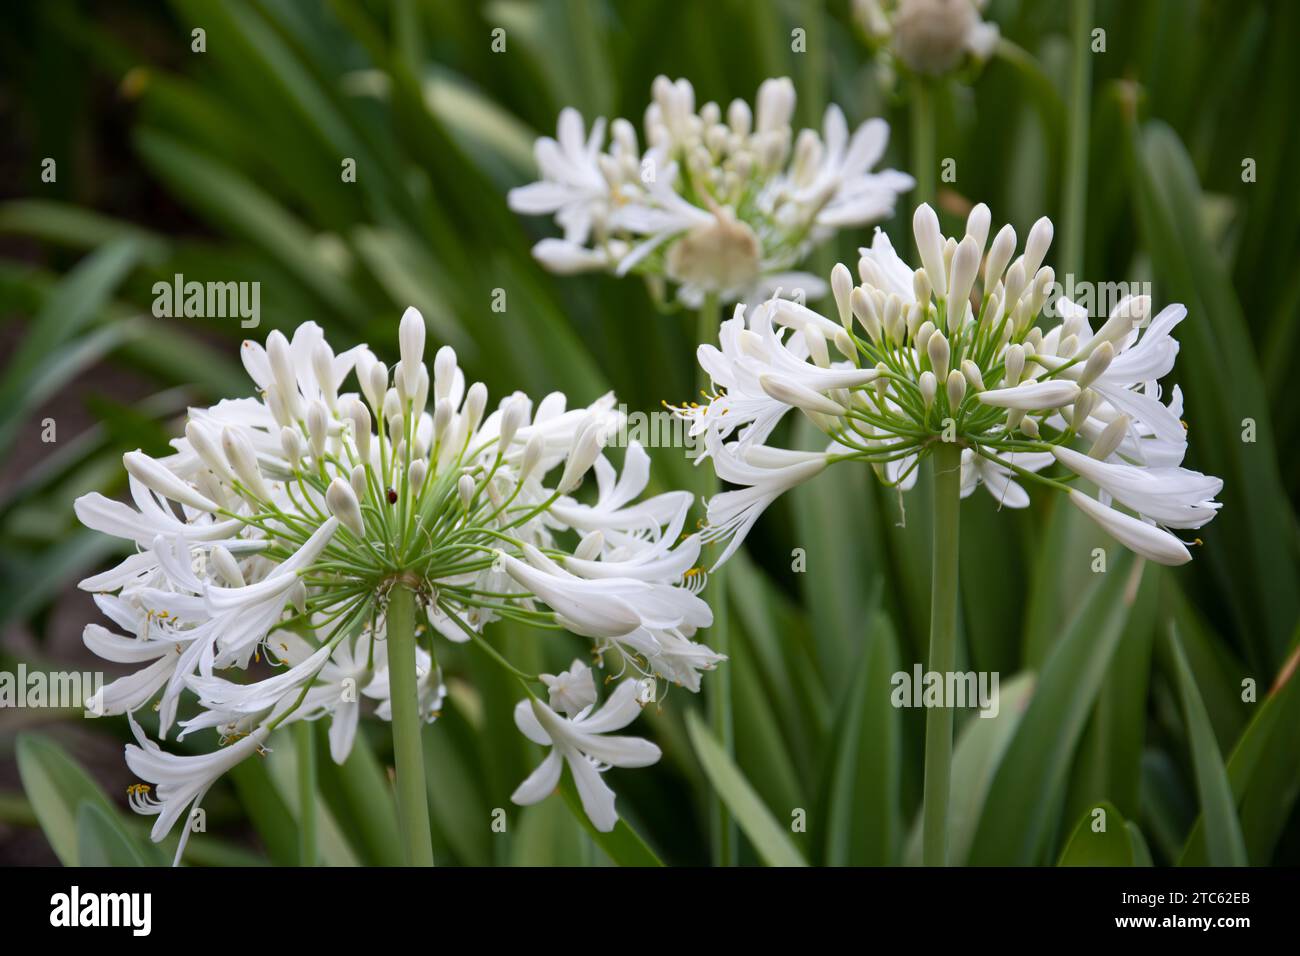 A close-up of bright African Lilly flowers with a few green stems against lush greenery Stock Photo